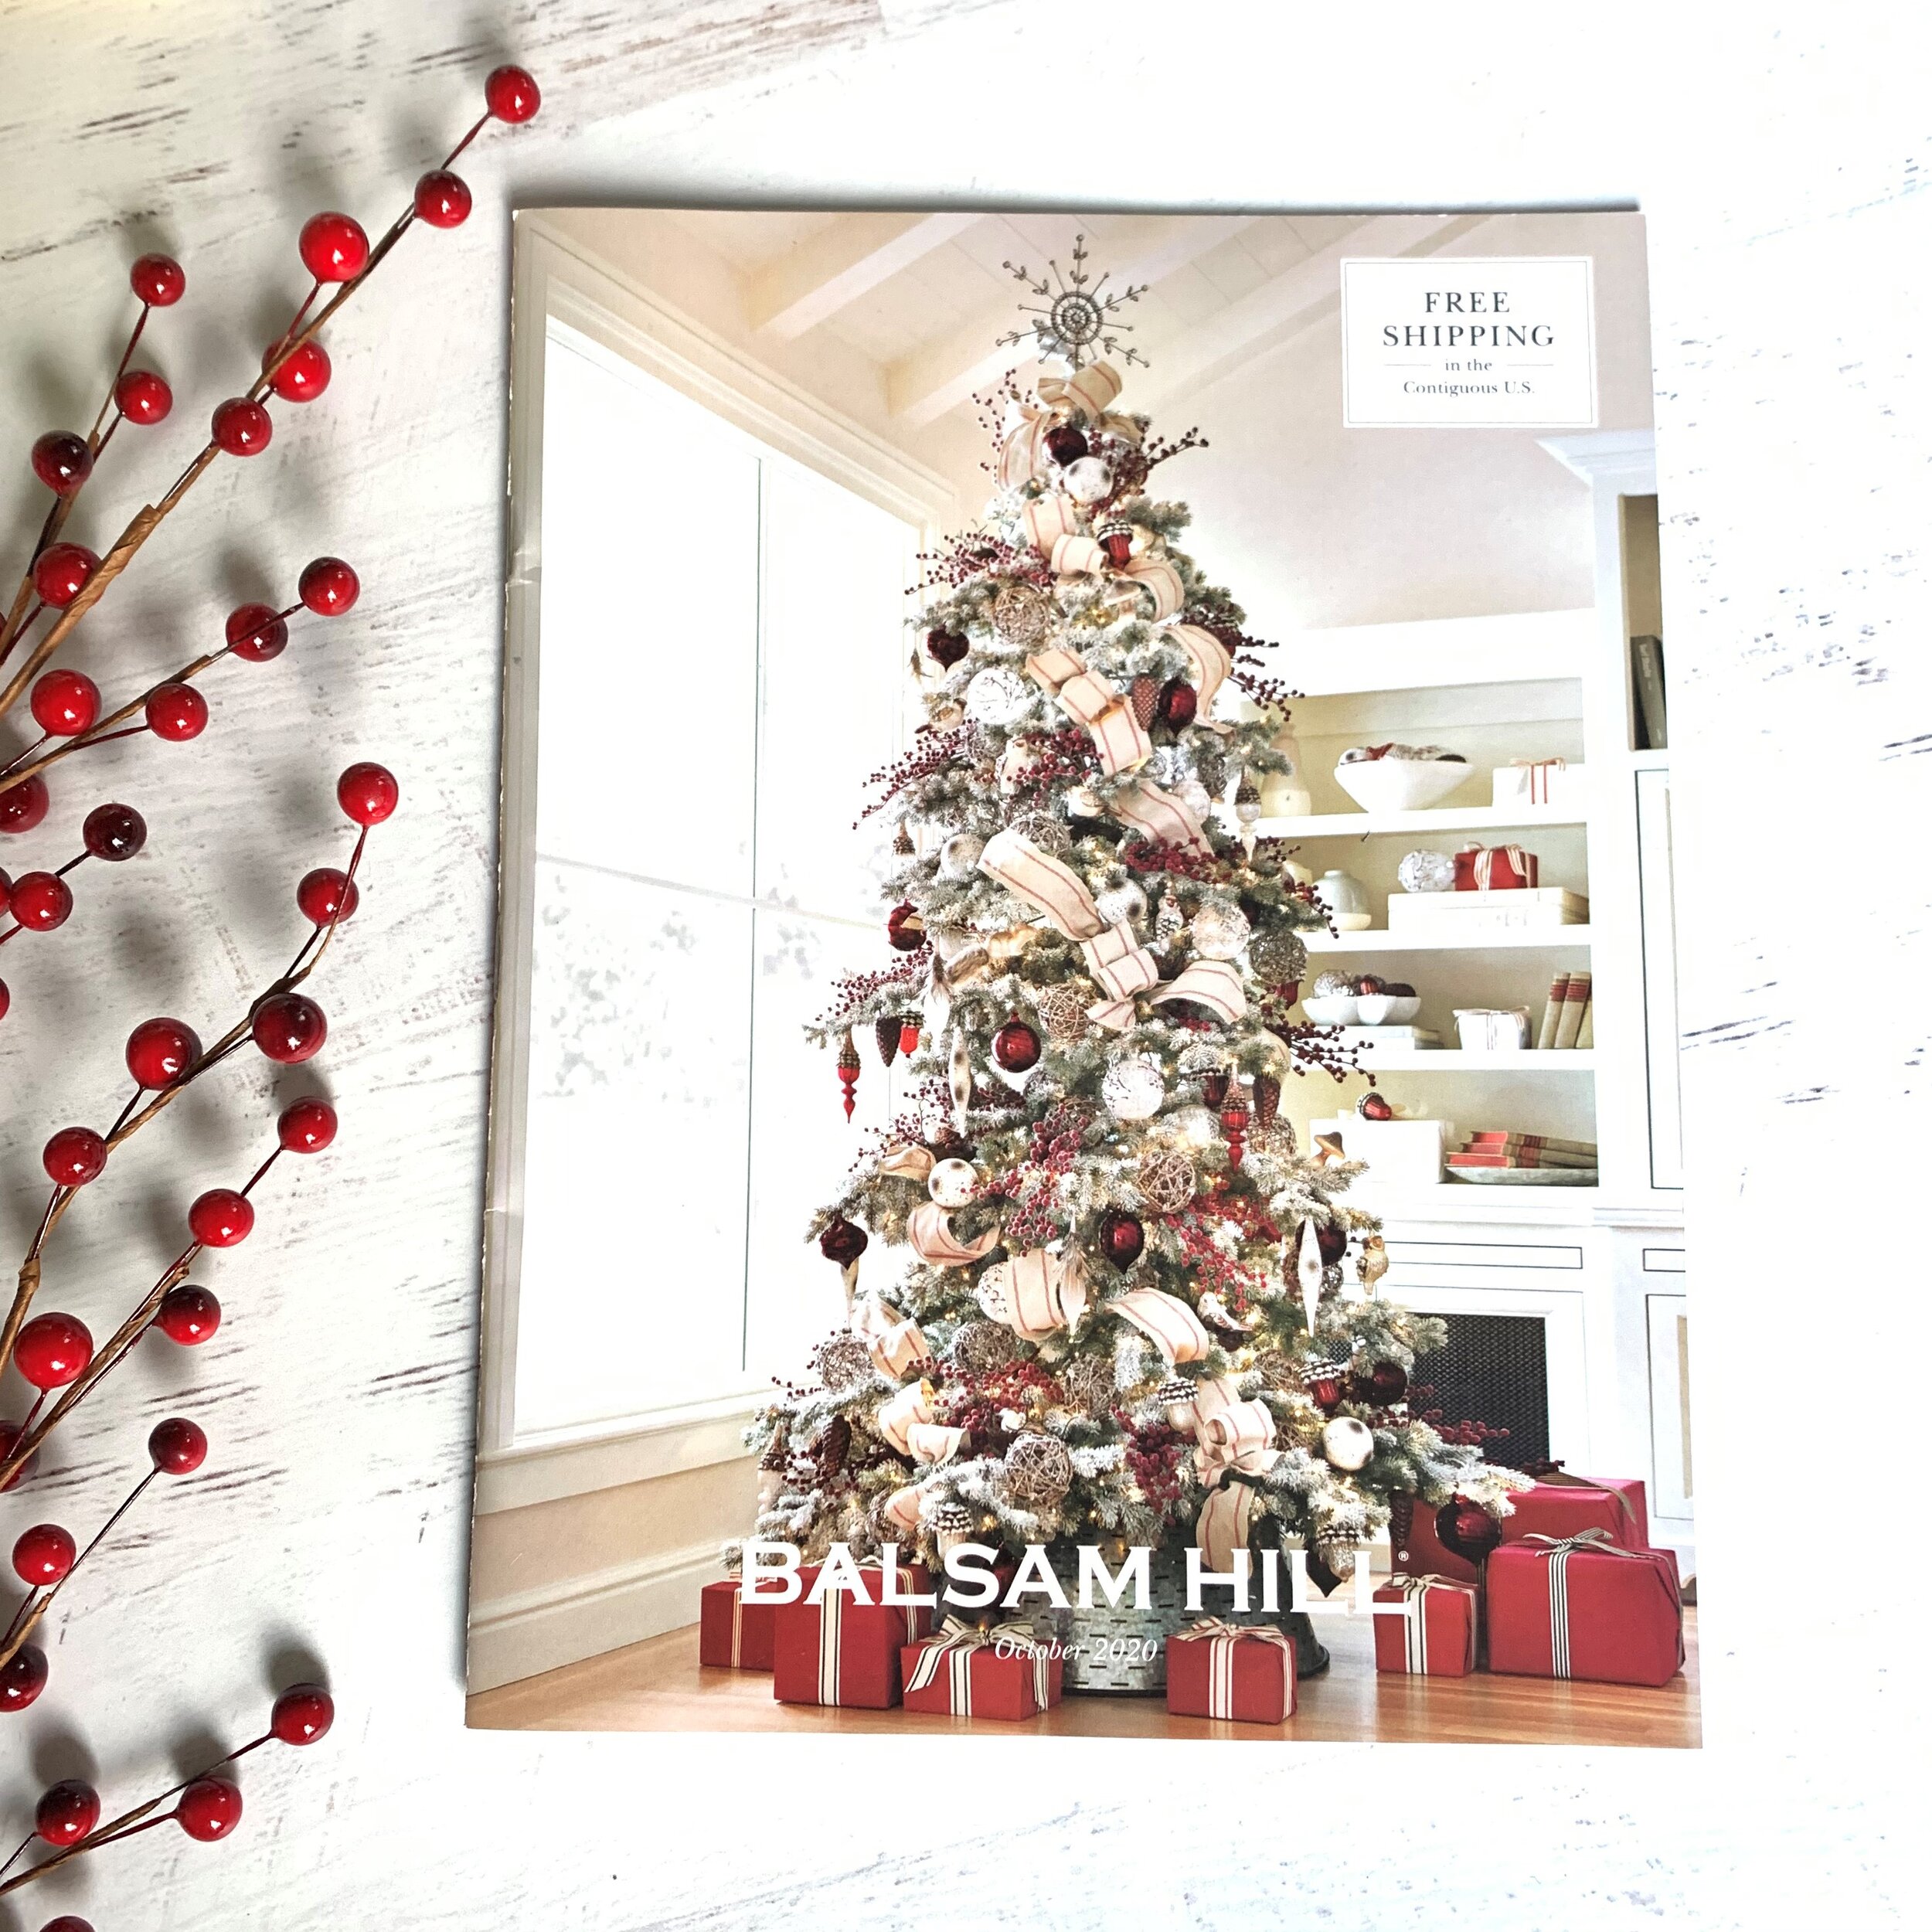 Balsam Hill Master Class Presented by Nordstrom — Sparkle on the Tree